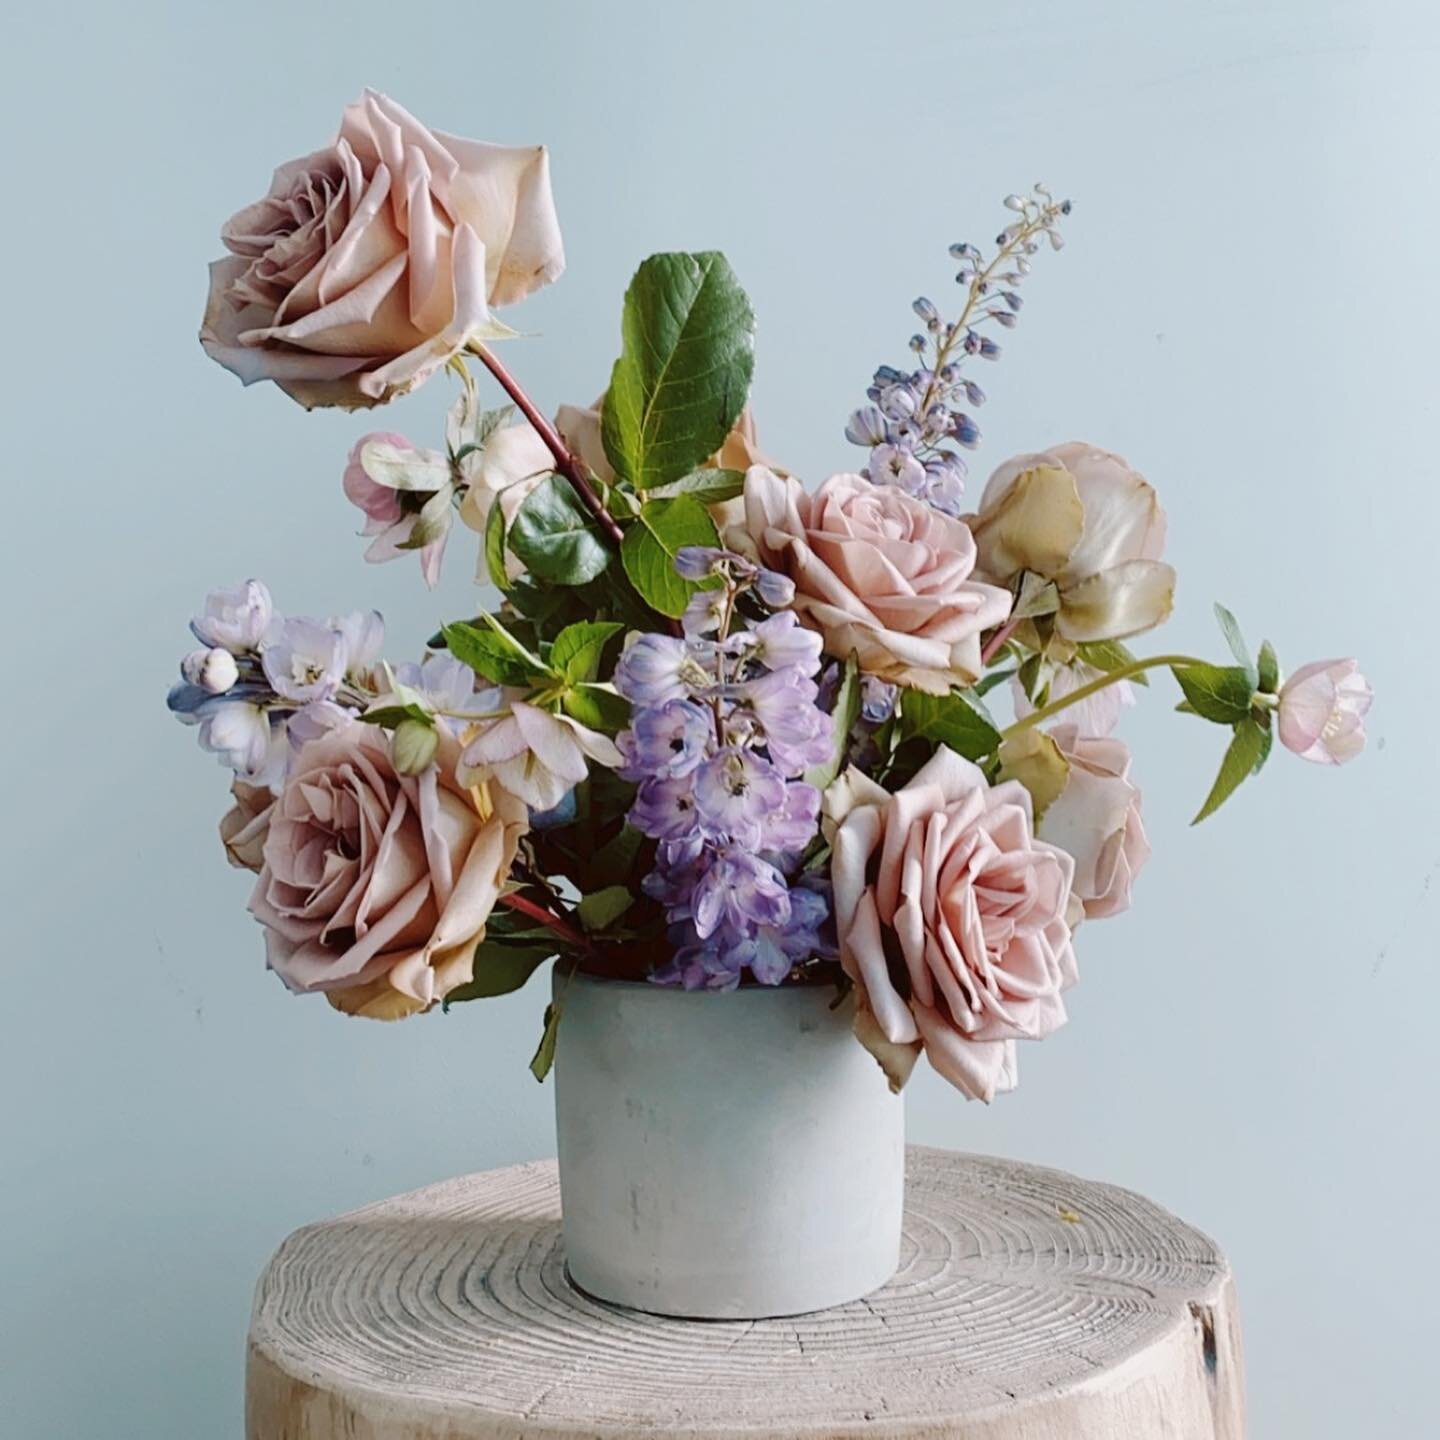 a preview of &ldquo;the saturday collection&rdquo; arrangements. we&rsquo;ll call this one dusty rose garden inspired.